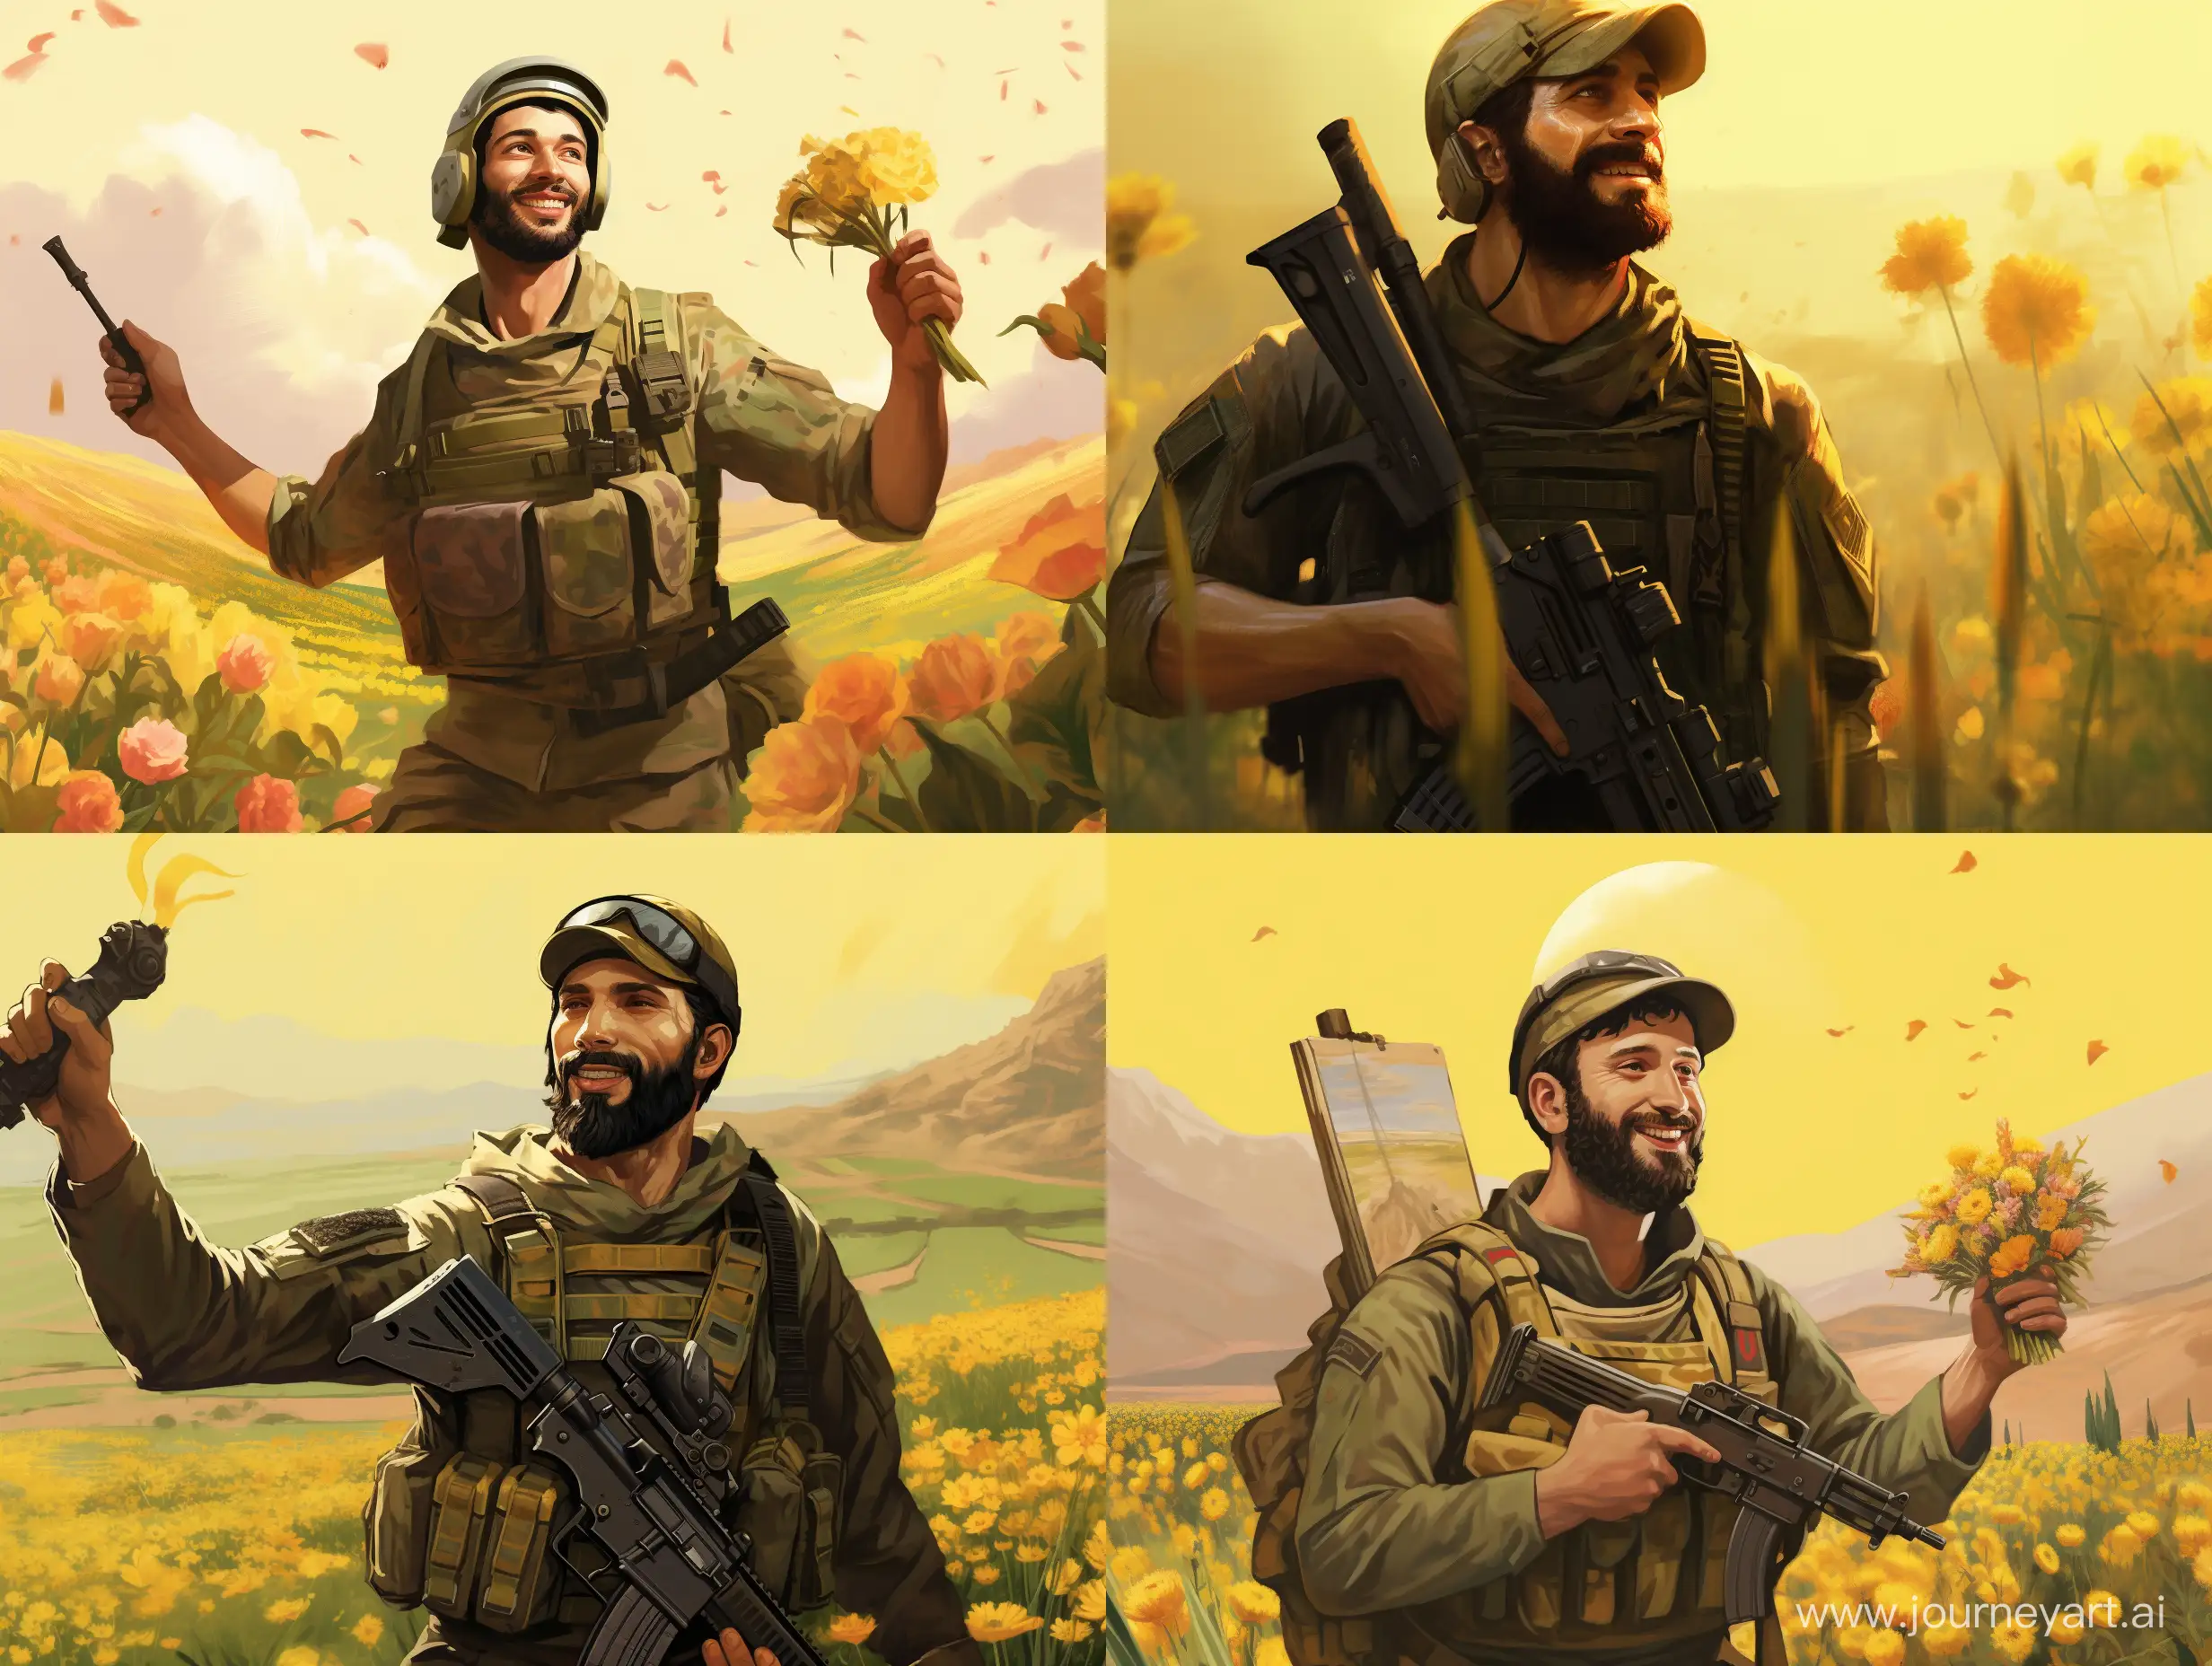 Hezbollah-Soldier-Smiling-in-Military-Uniform-amid-Yellow-Roses